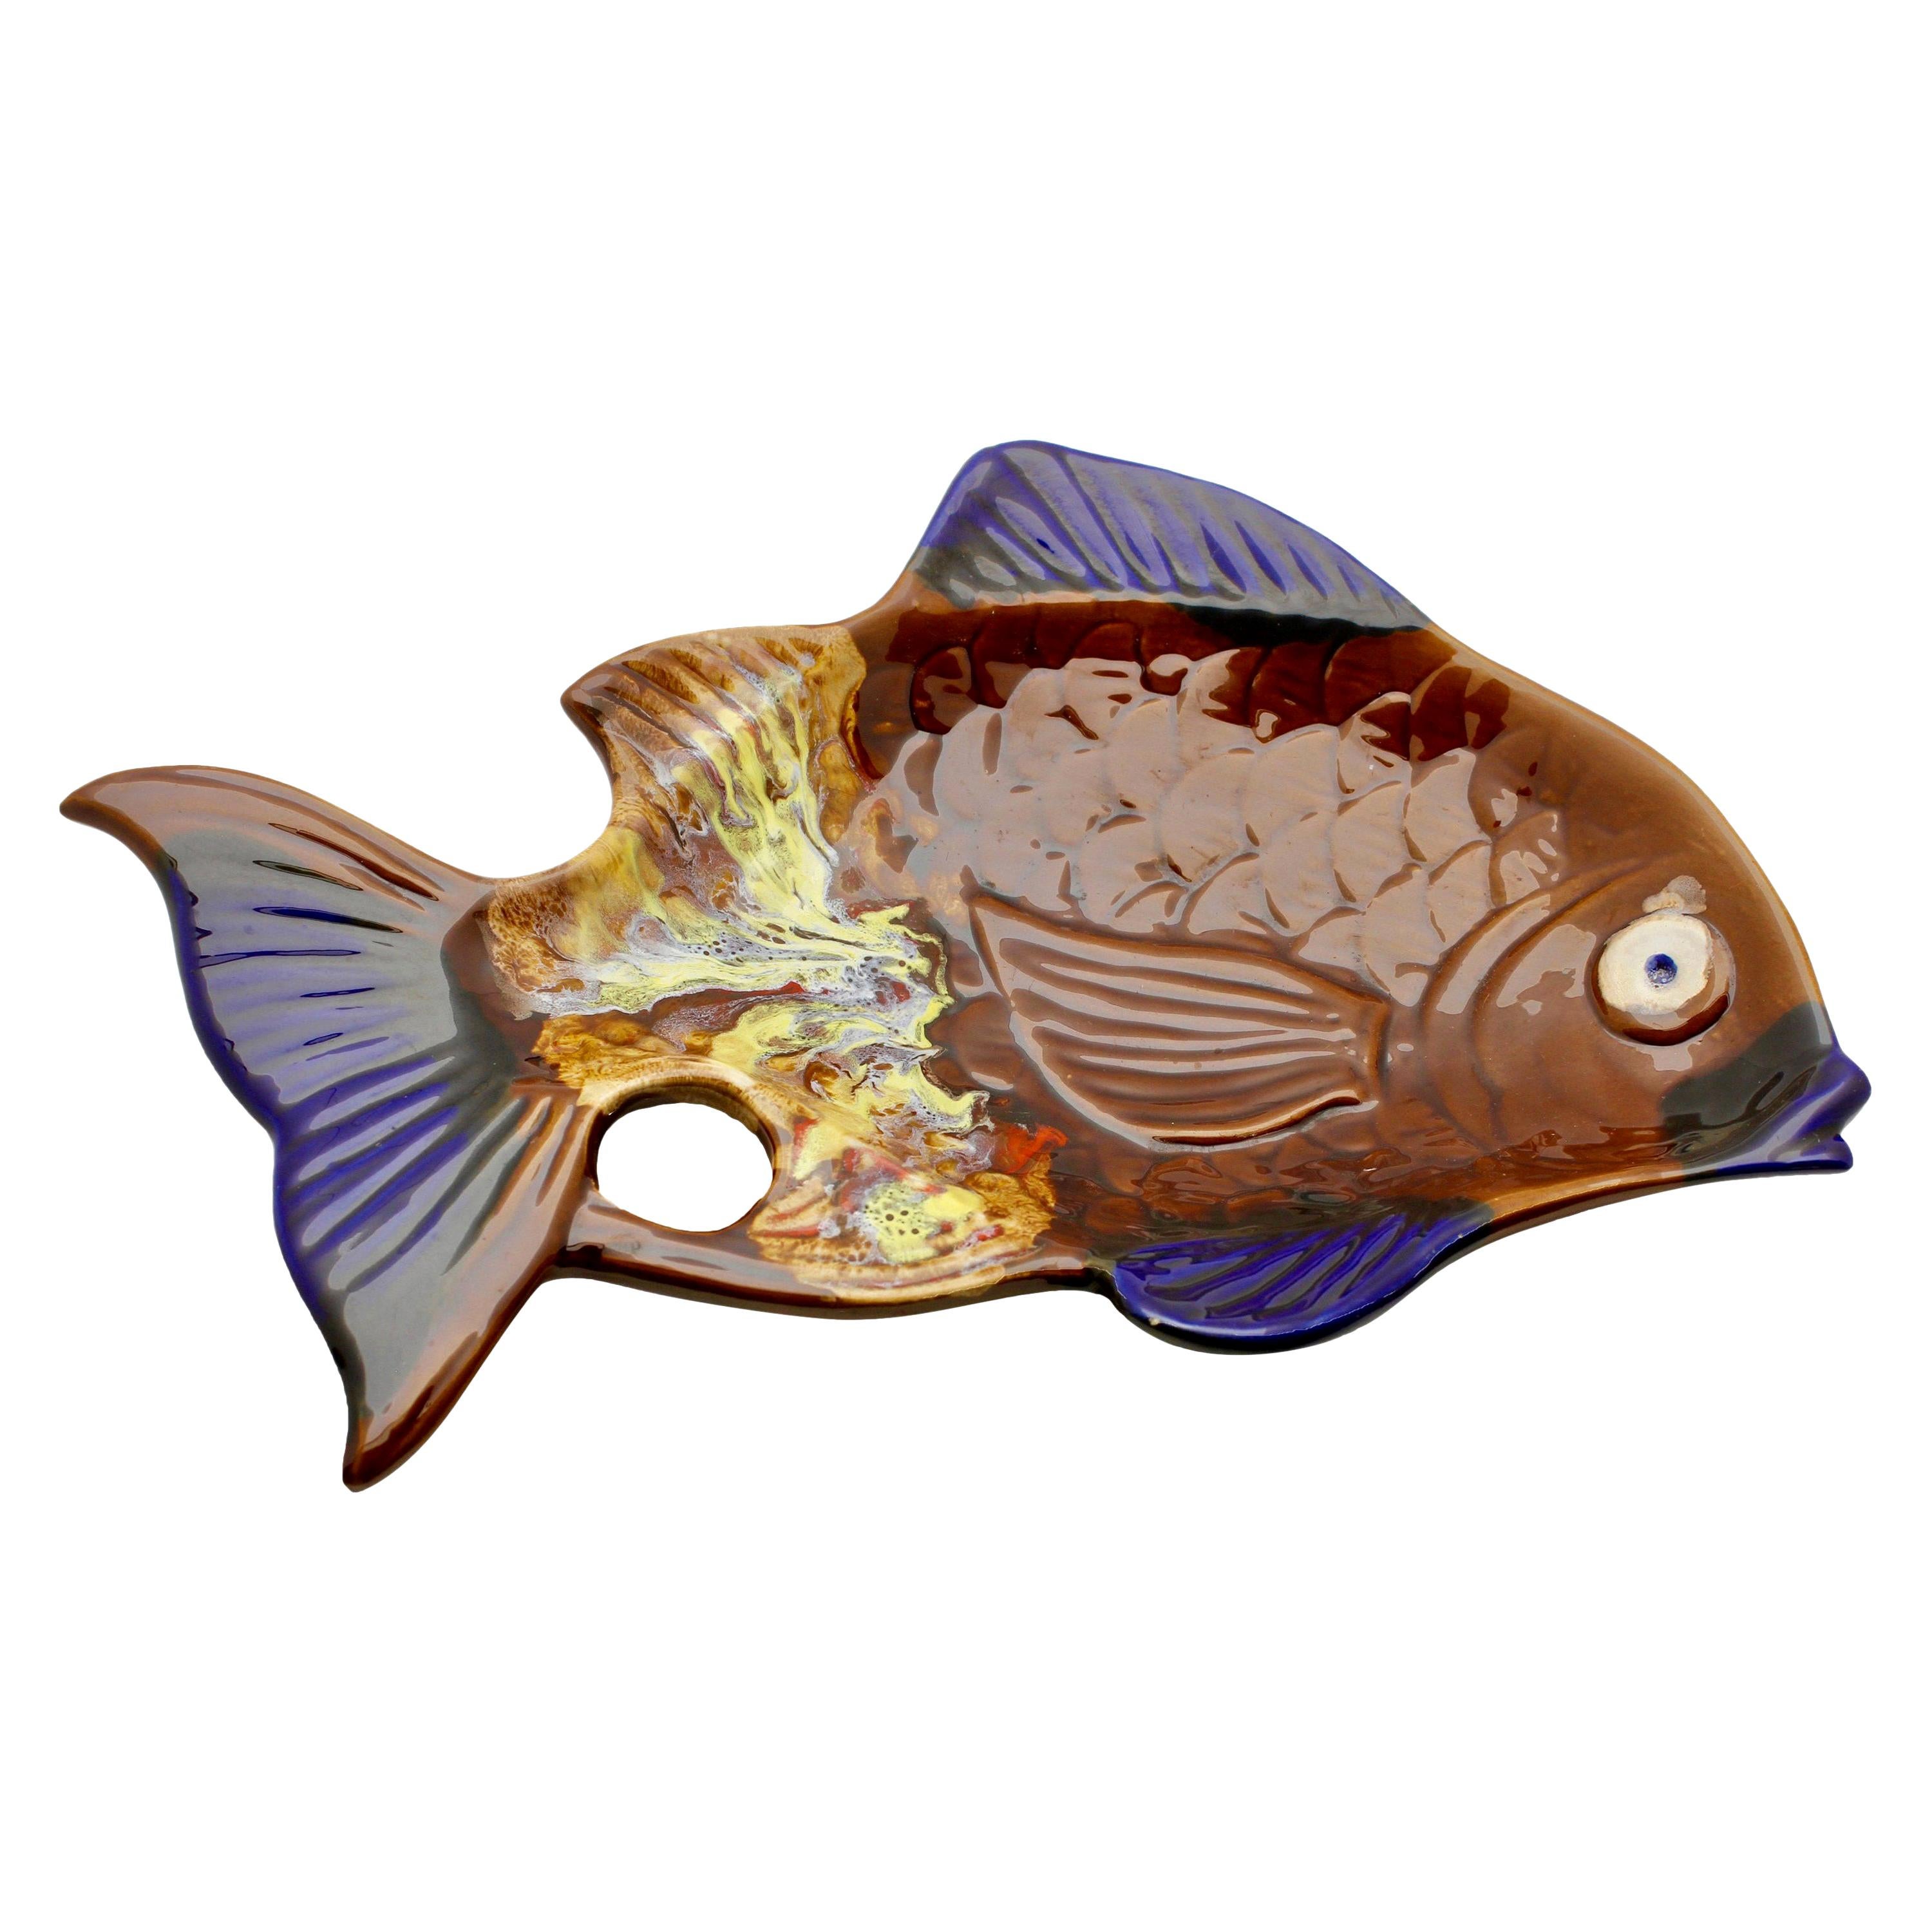 Vallauris 'France' Pottery Ceramic Fish Shape in Colors Brown and Blue